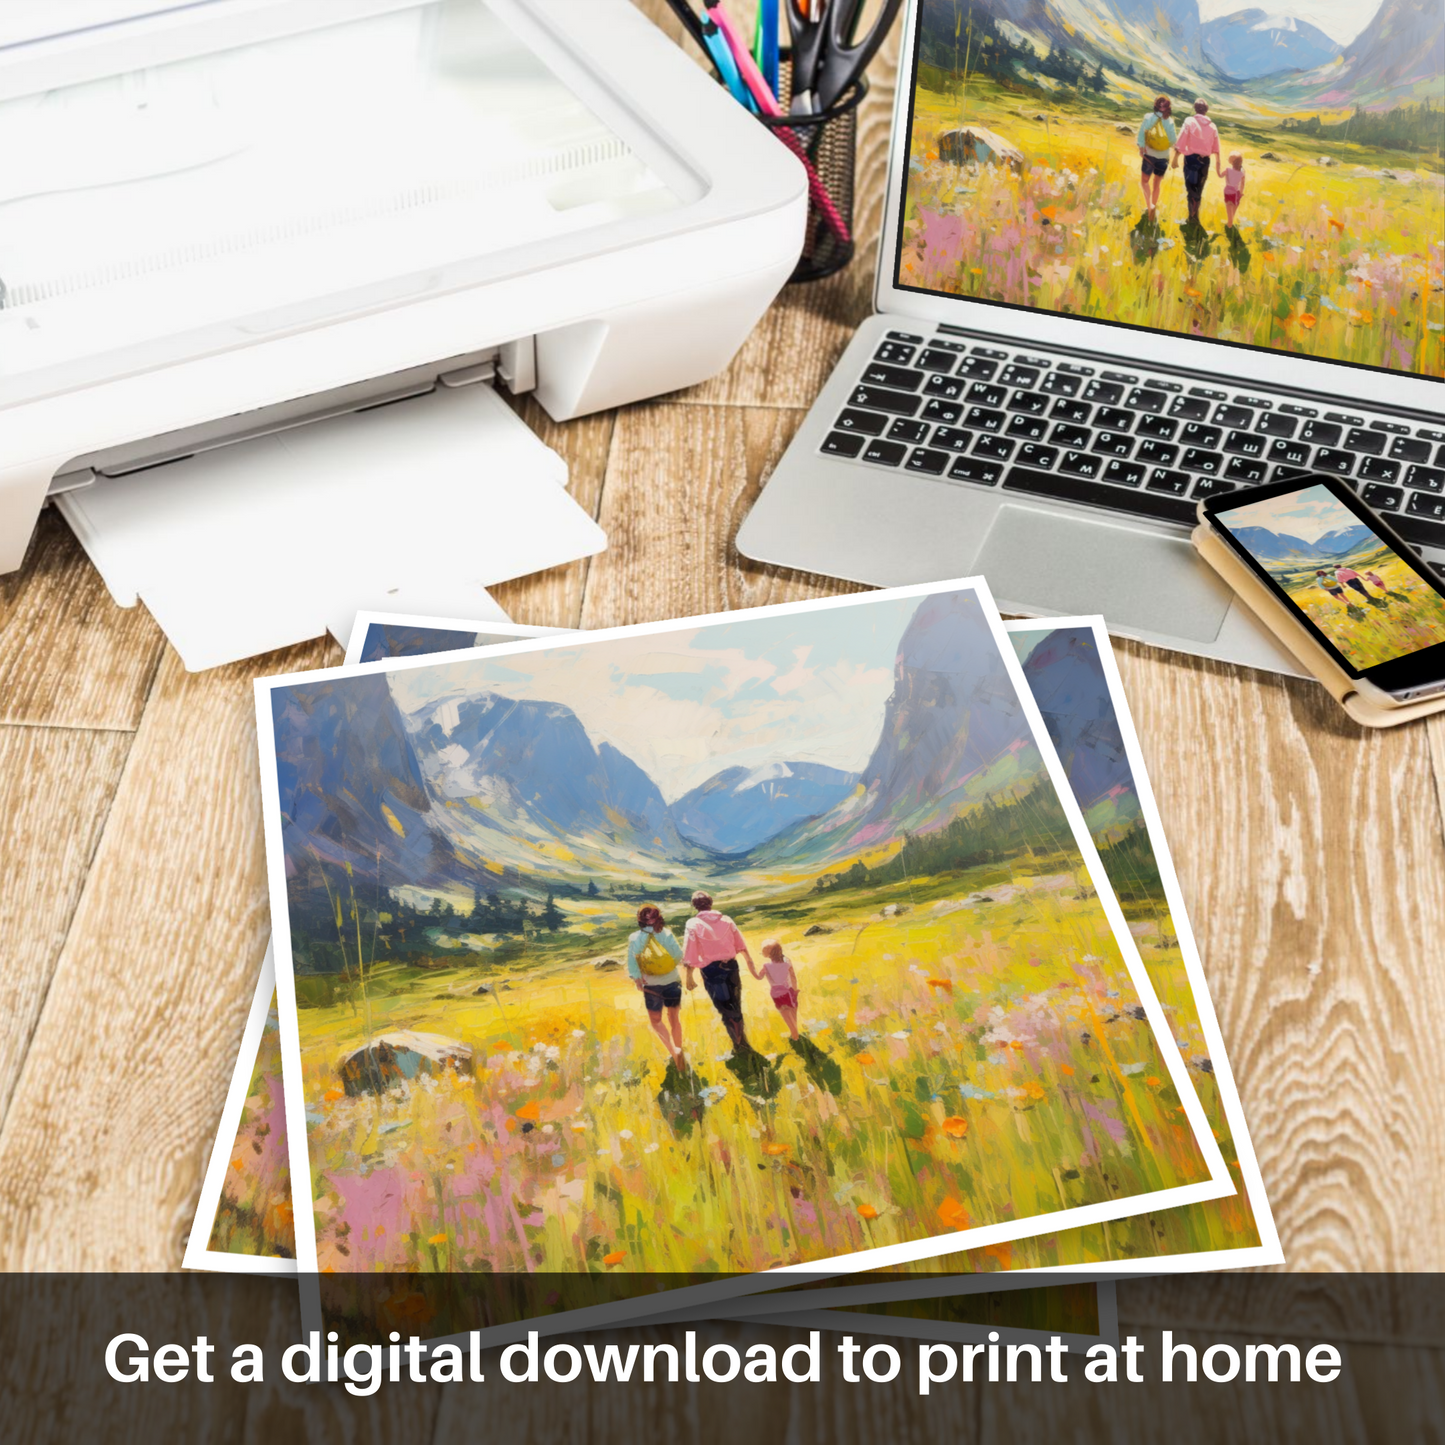 Downloadable and printable picture of Family in Glencoe during summer